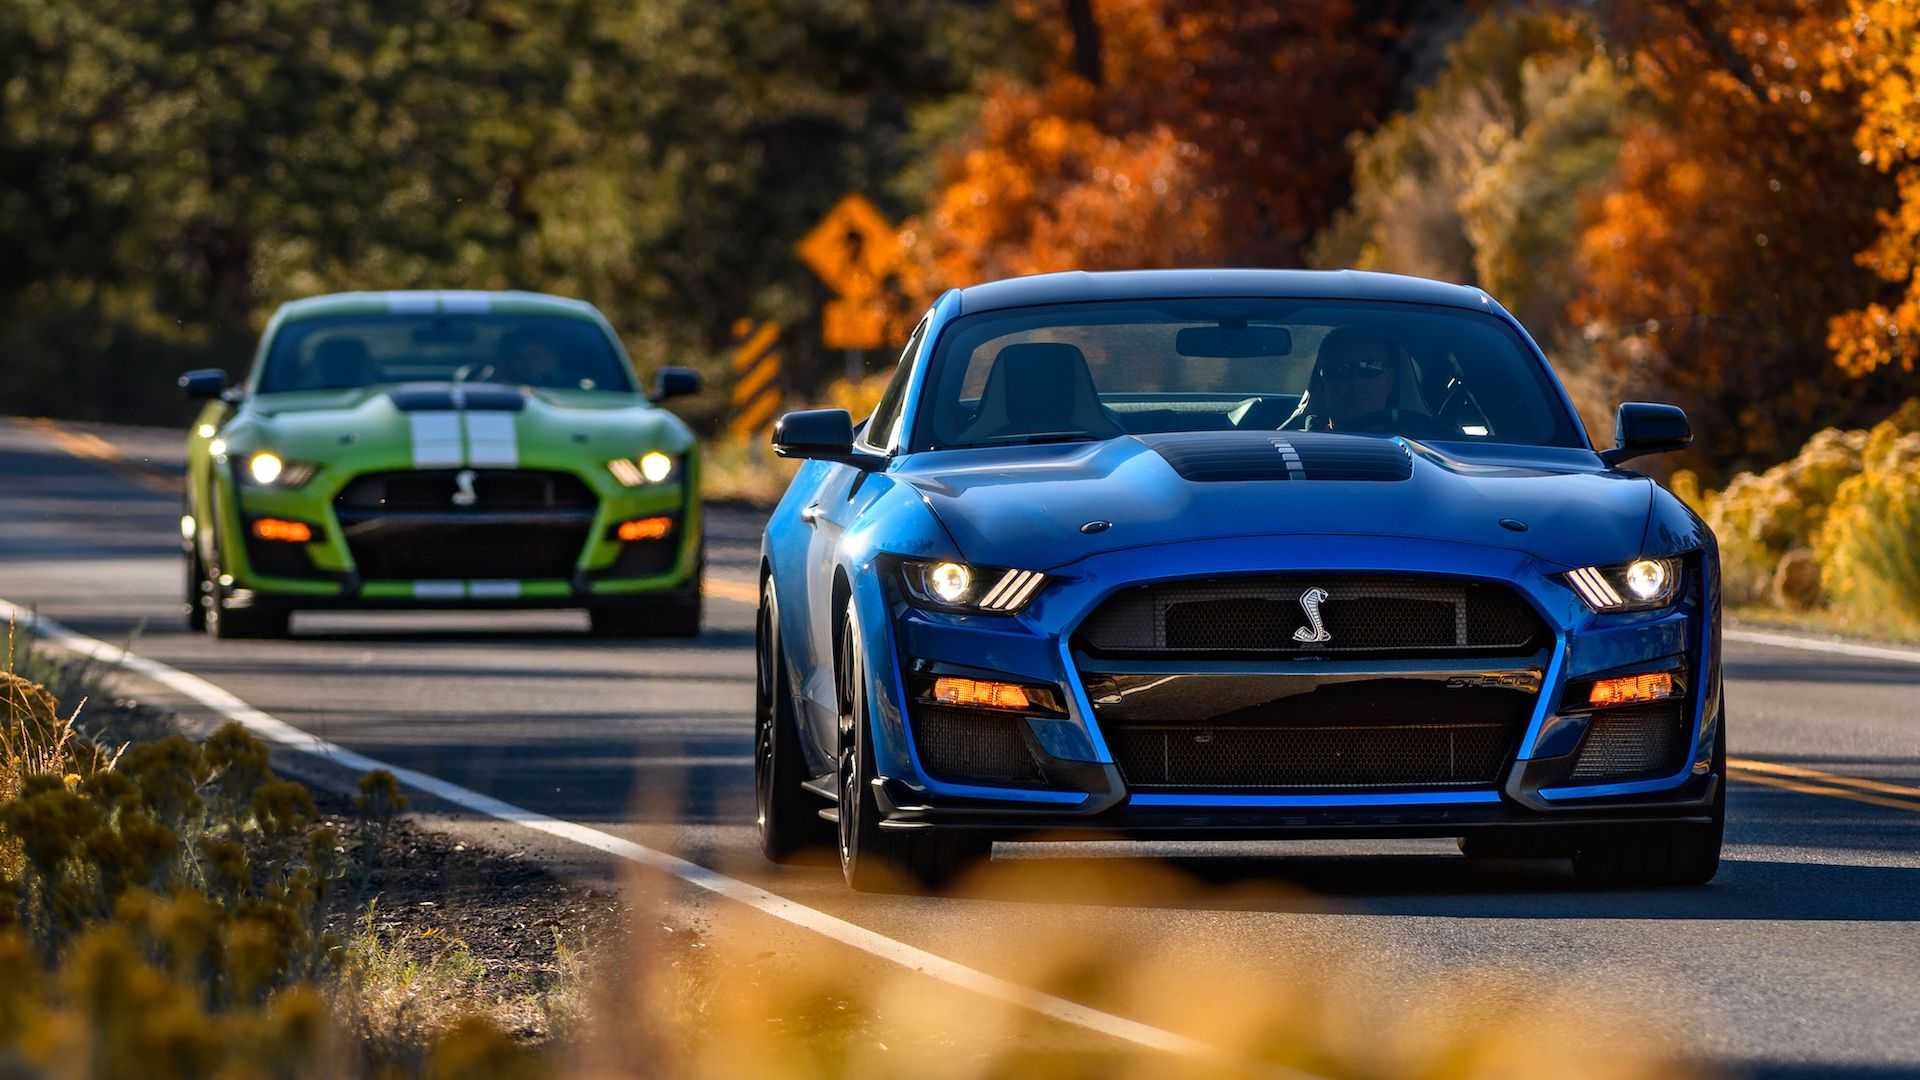 New Ford Mustang Coming According To Company's Job Listing